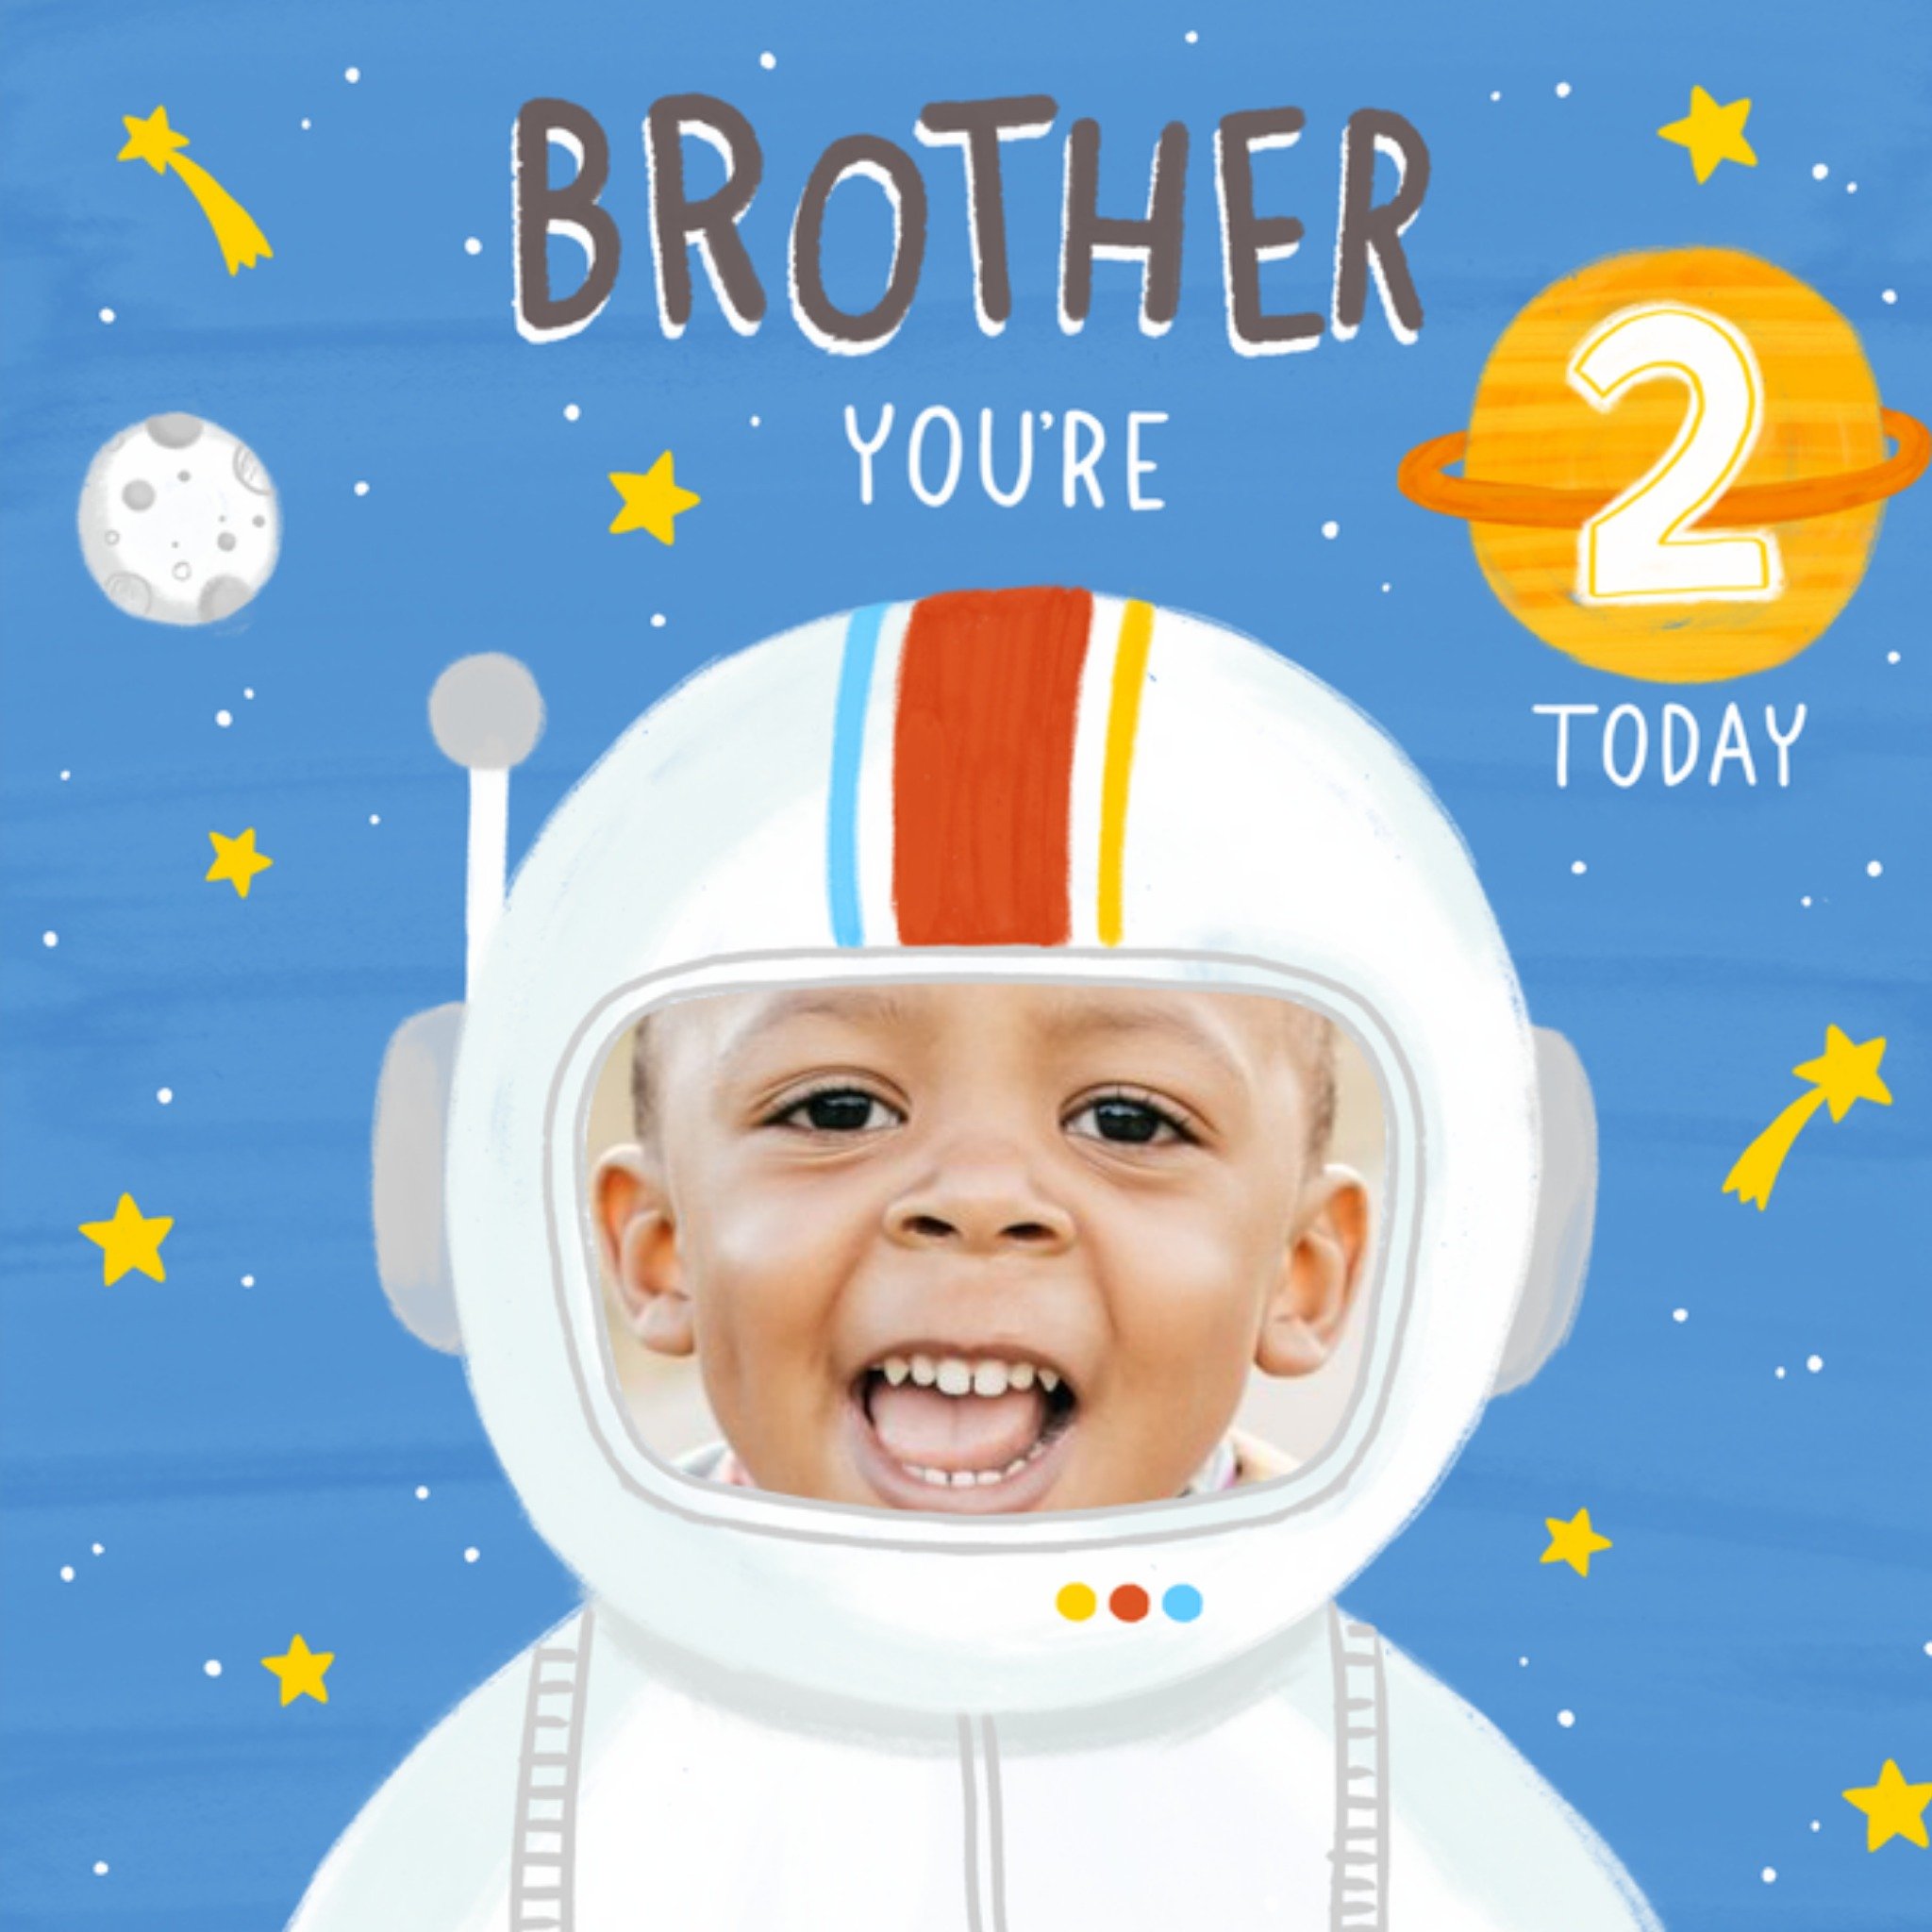 Moonpig Cute Brother Space Photo Upload 2 Today Birthday Card, Square